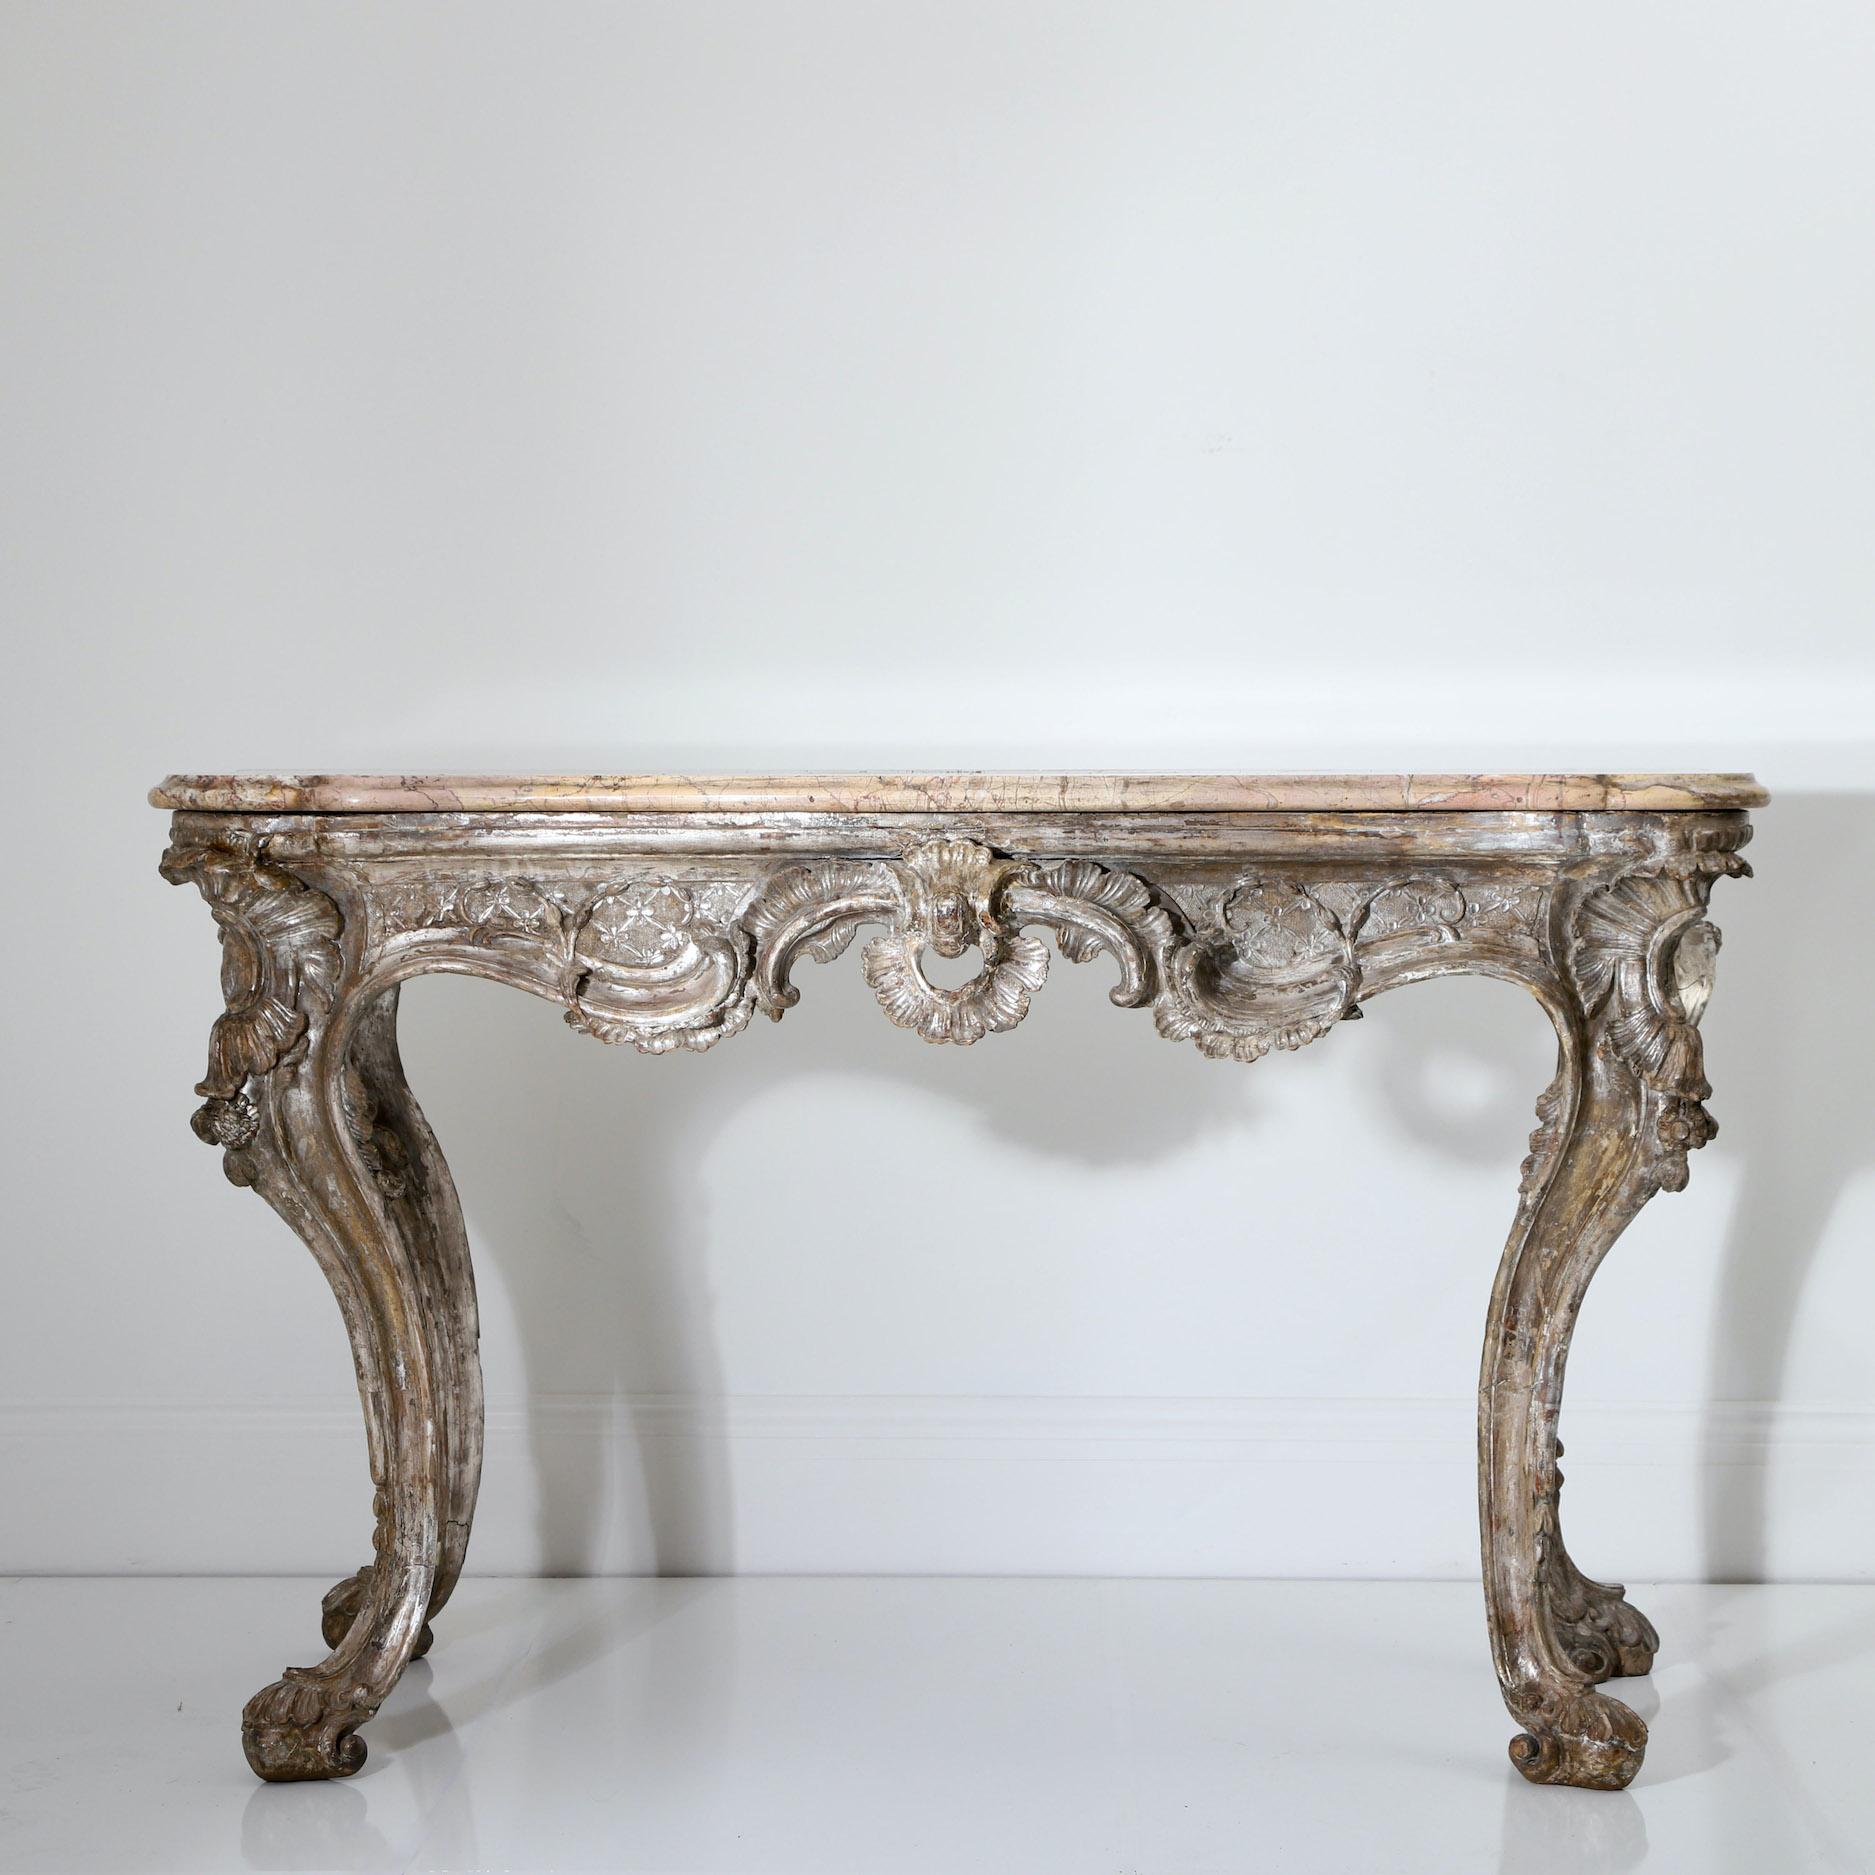 Vagabond Antiques presents an 18th century Italian console table

Italy, Naples, Circa 1740

” A stunning 18th century console table that has a fantastic stance and presence, we have removed a much later gilded surface to reveal the original